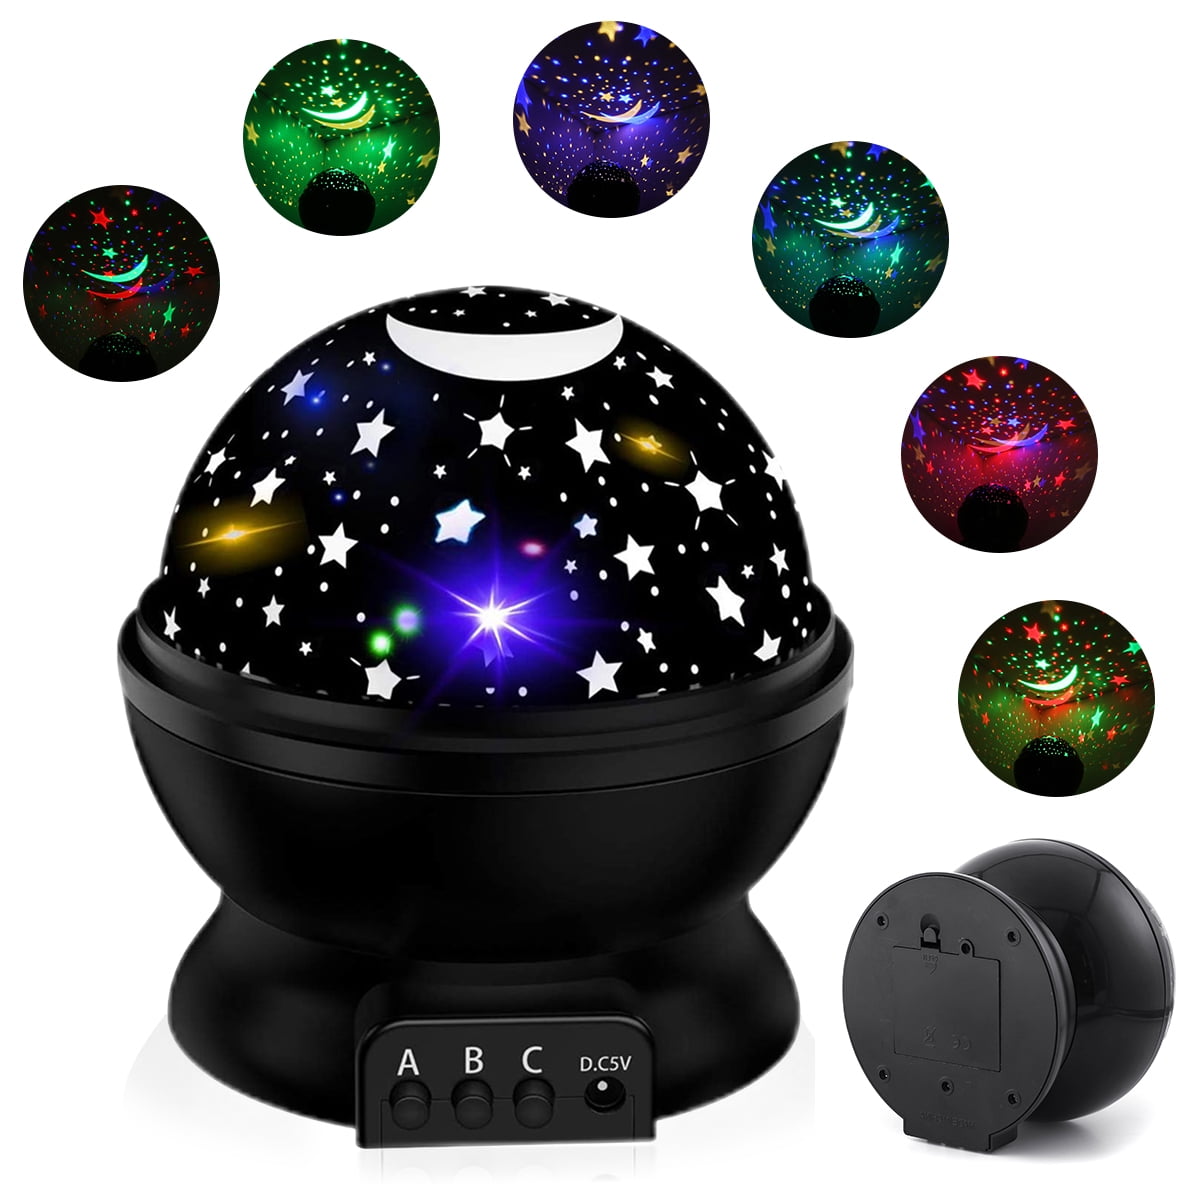 Details about   Sky Projector Star Light Starry Children Night Lights Led Galaxy Lamp Xmas Gift 